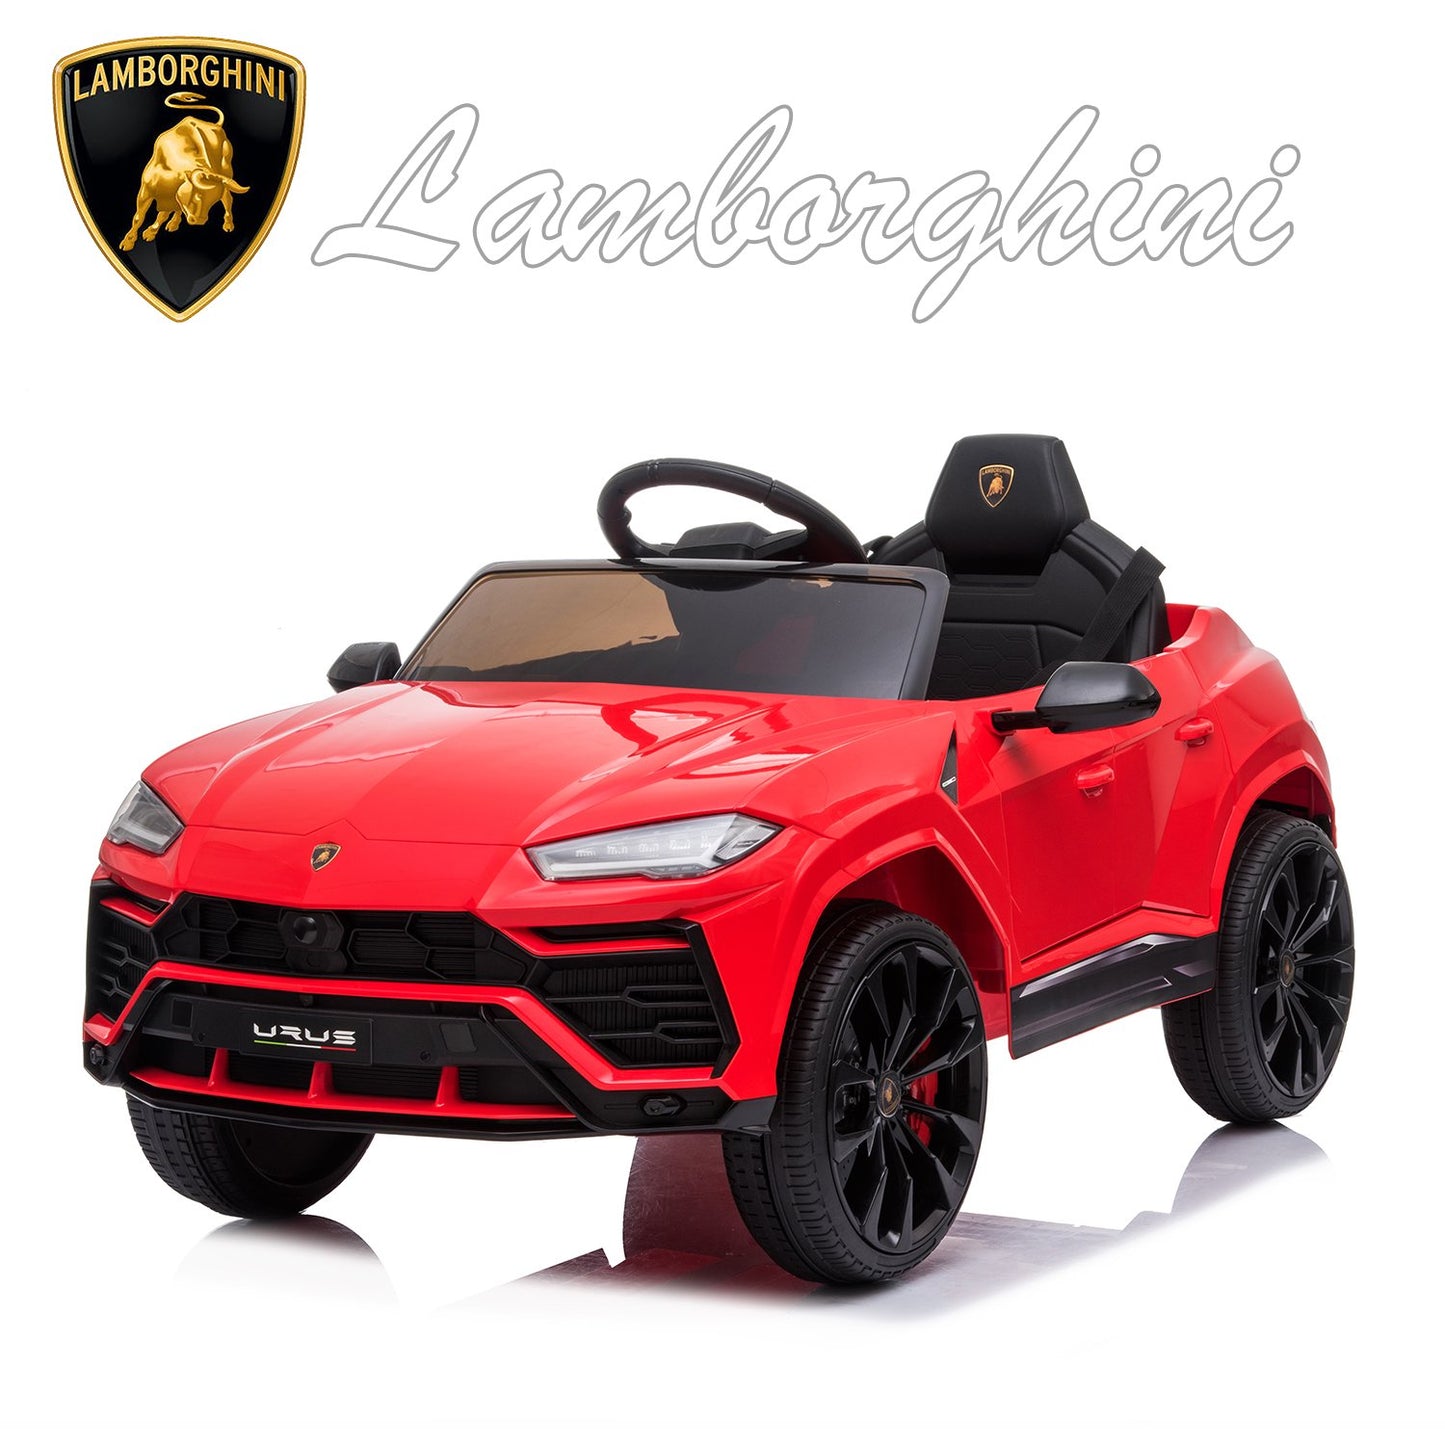 Red Licensed Lamborghini 12 V Powered Ride on Cars with Remote Control, 3 Speeds, LED Lights, MP3 Player, Horn, Kids Electric Vehicles Ride on Toy for Boys Girls